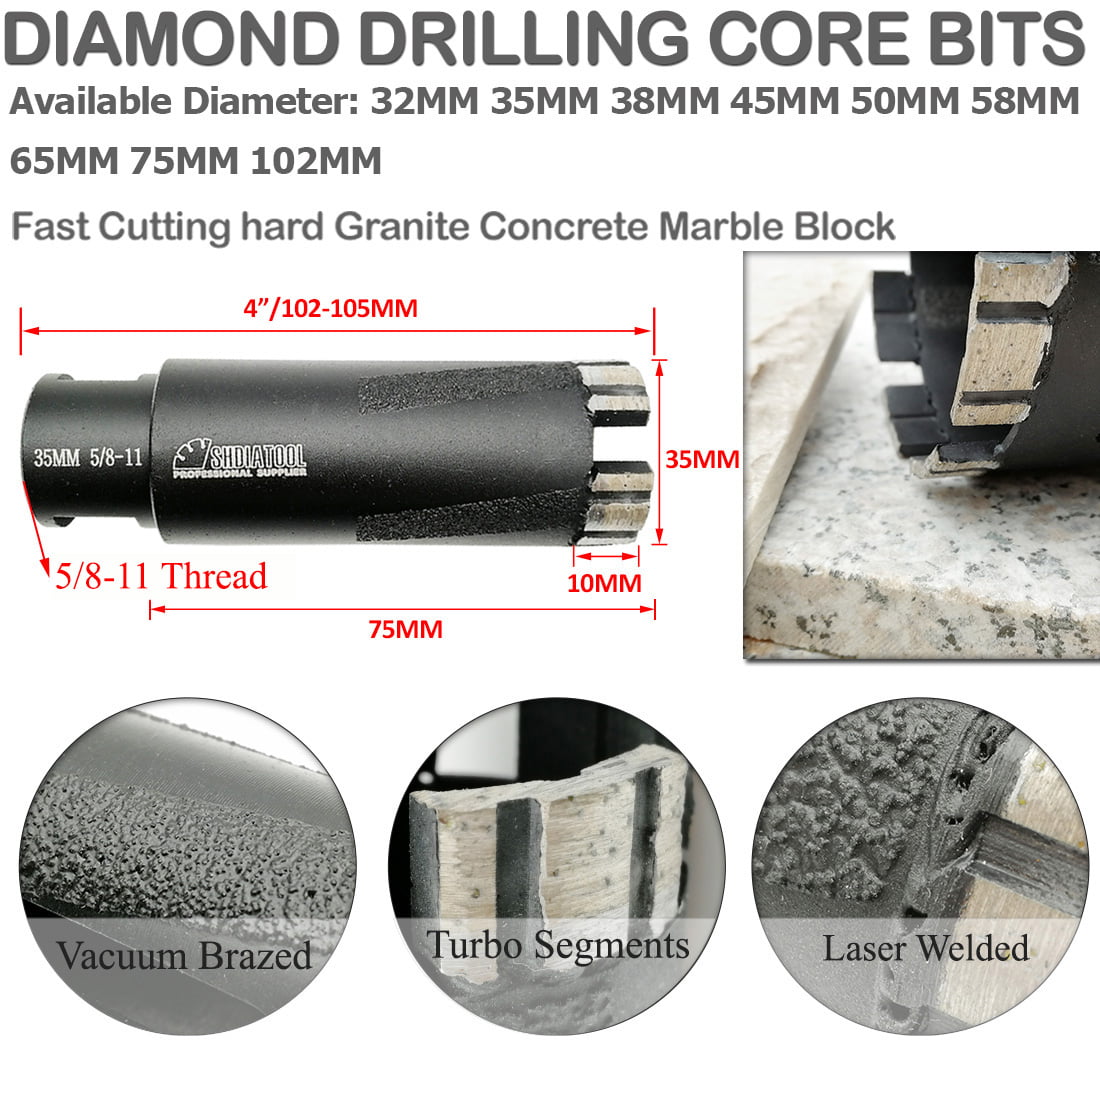 1-1/2"-Inch Toolocity Wet/Dry Laser Welded Coring Core Concrete Drill Bit 